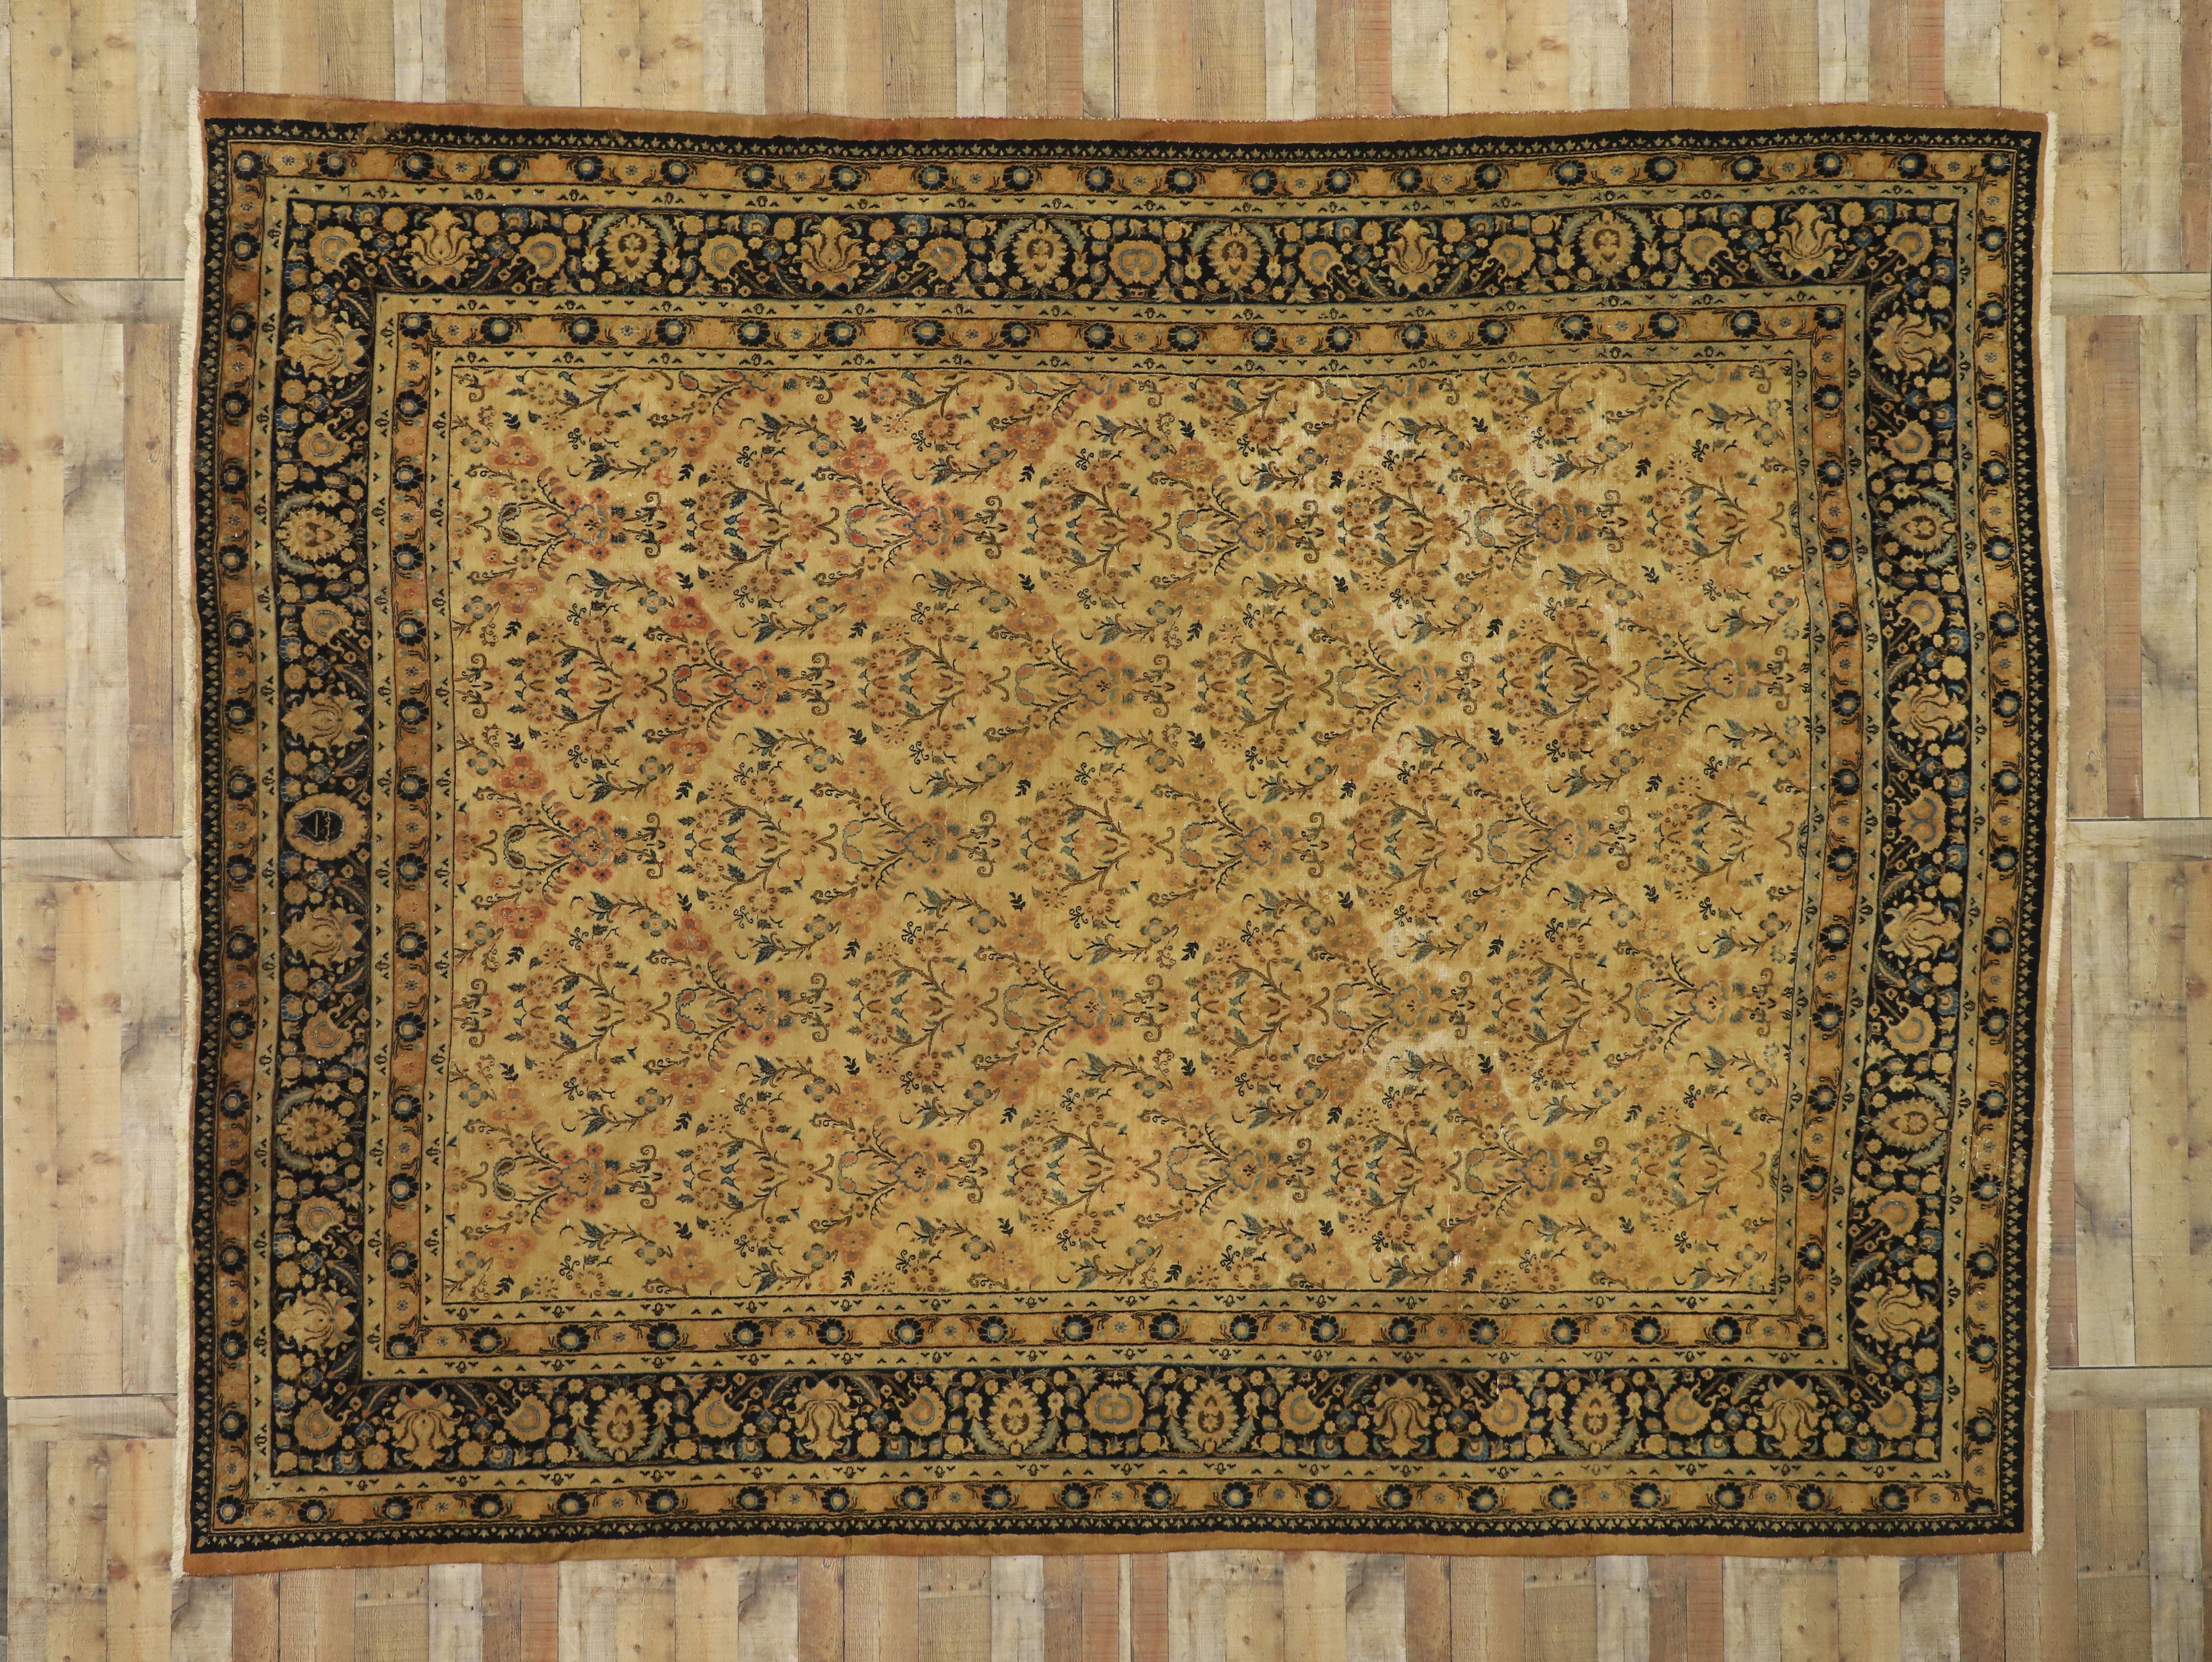 20th Century Antique Persian Mashhad Rug with Shabby Chic Rustic European Cottage Style For Sale